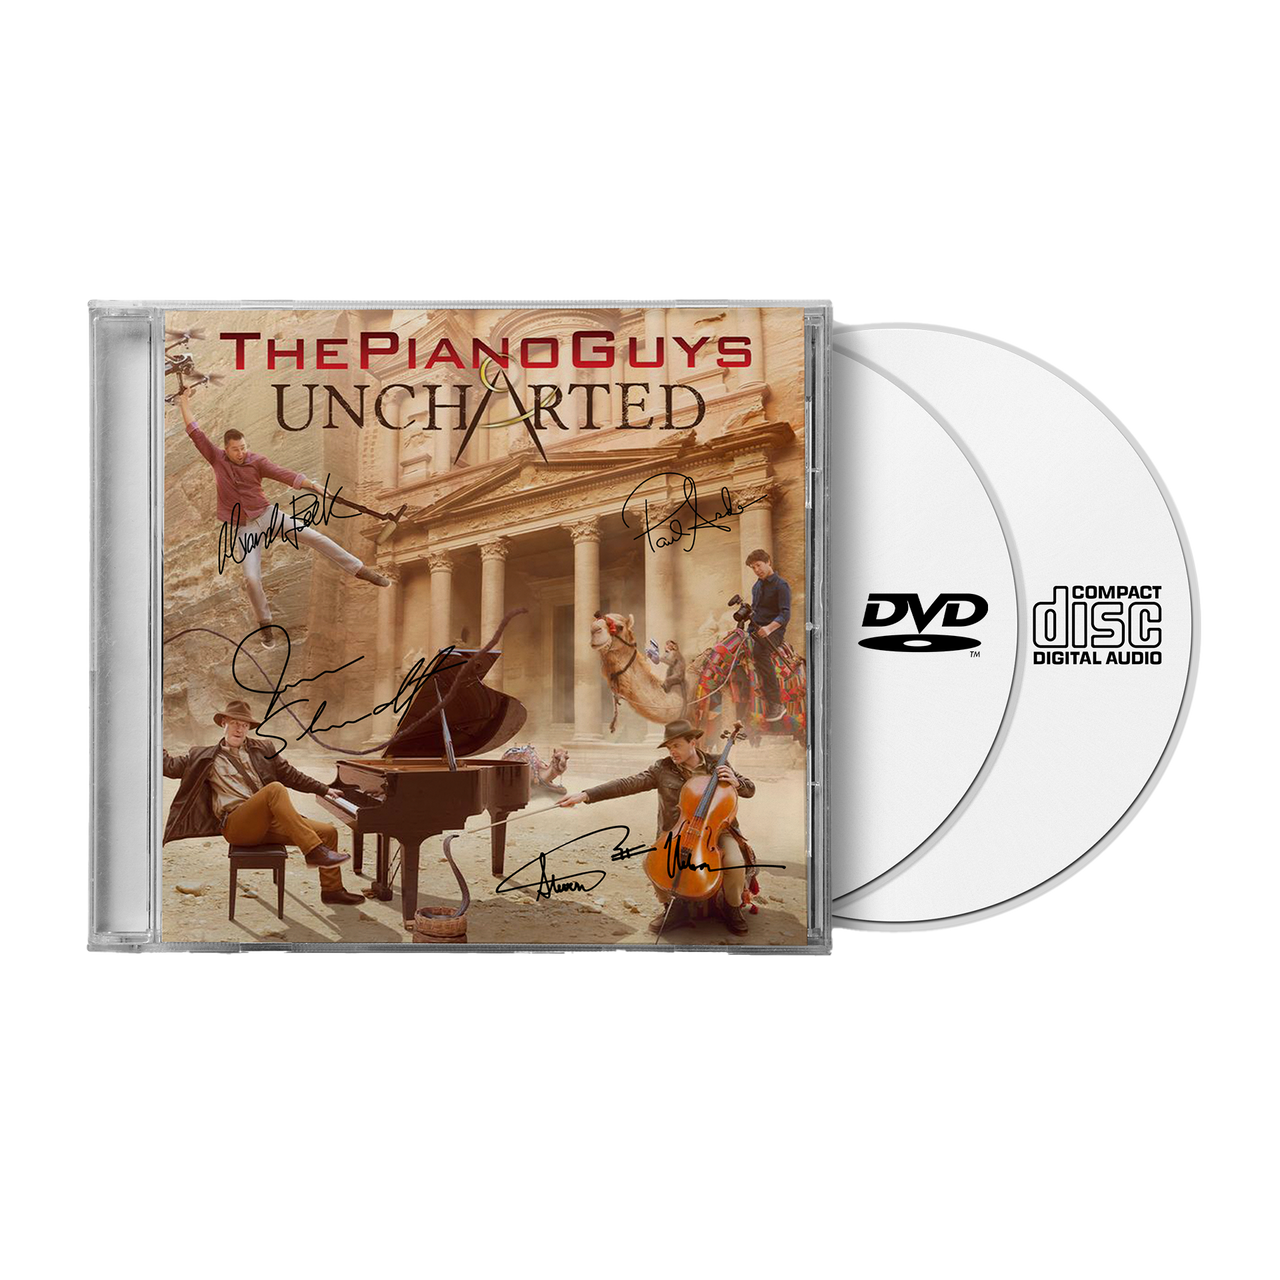 The Piano Guys "UNCHARTED"